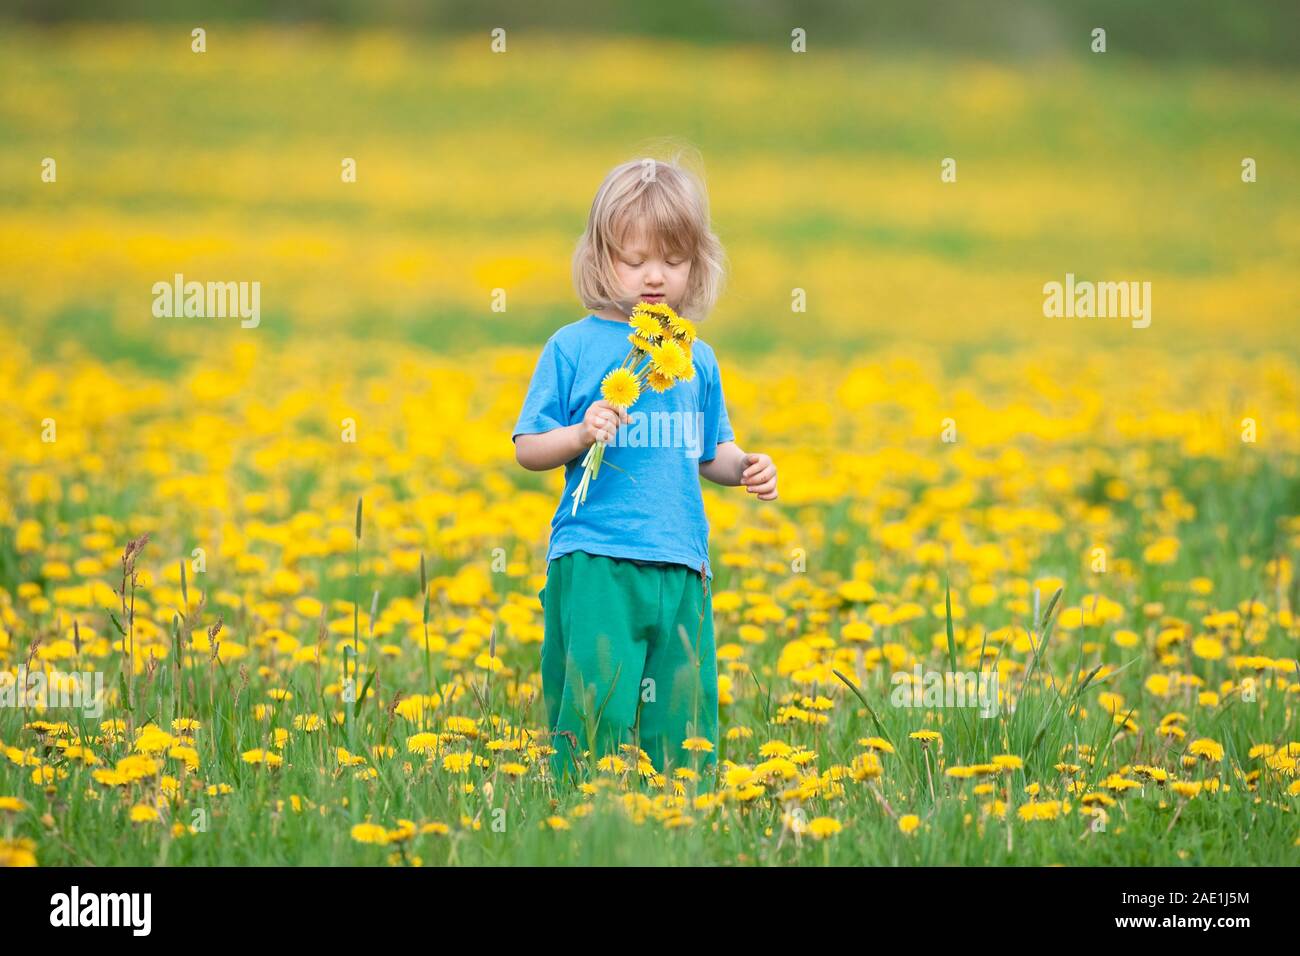 boy with long hair standing in a dandelion field Stock Photo